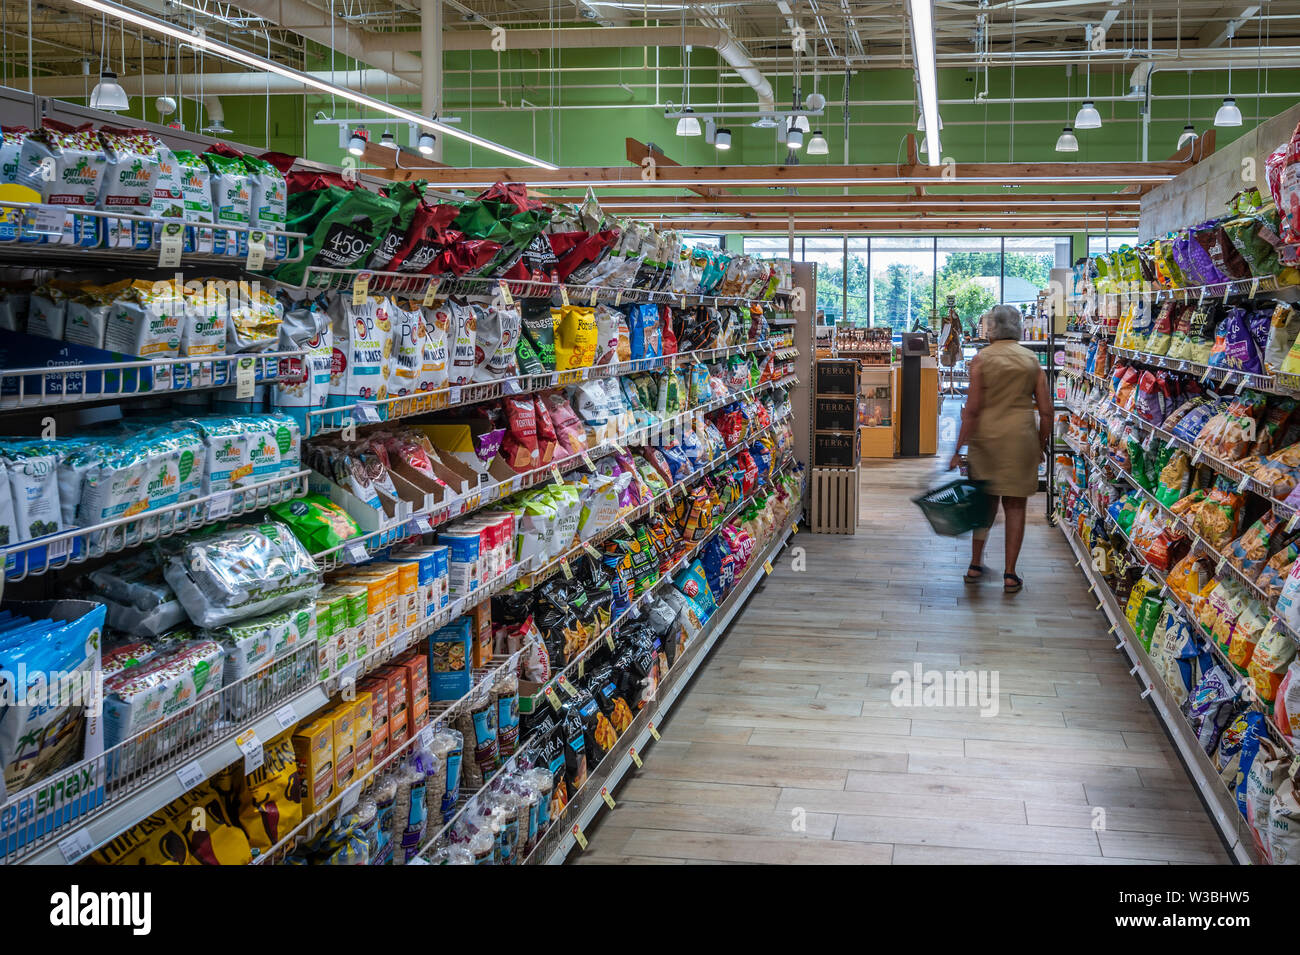 Elderly Woman Shopping In American Grocery Store, USA Stock Photo